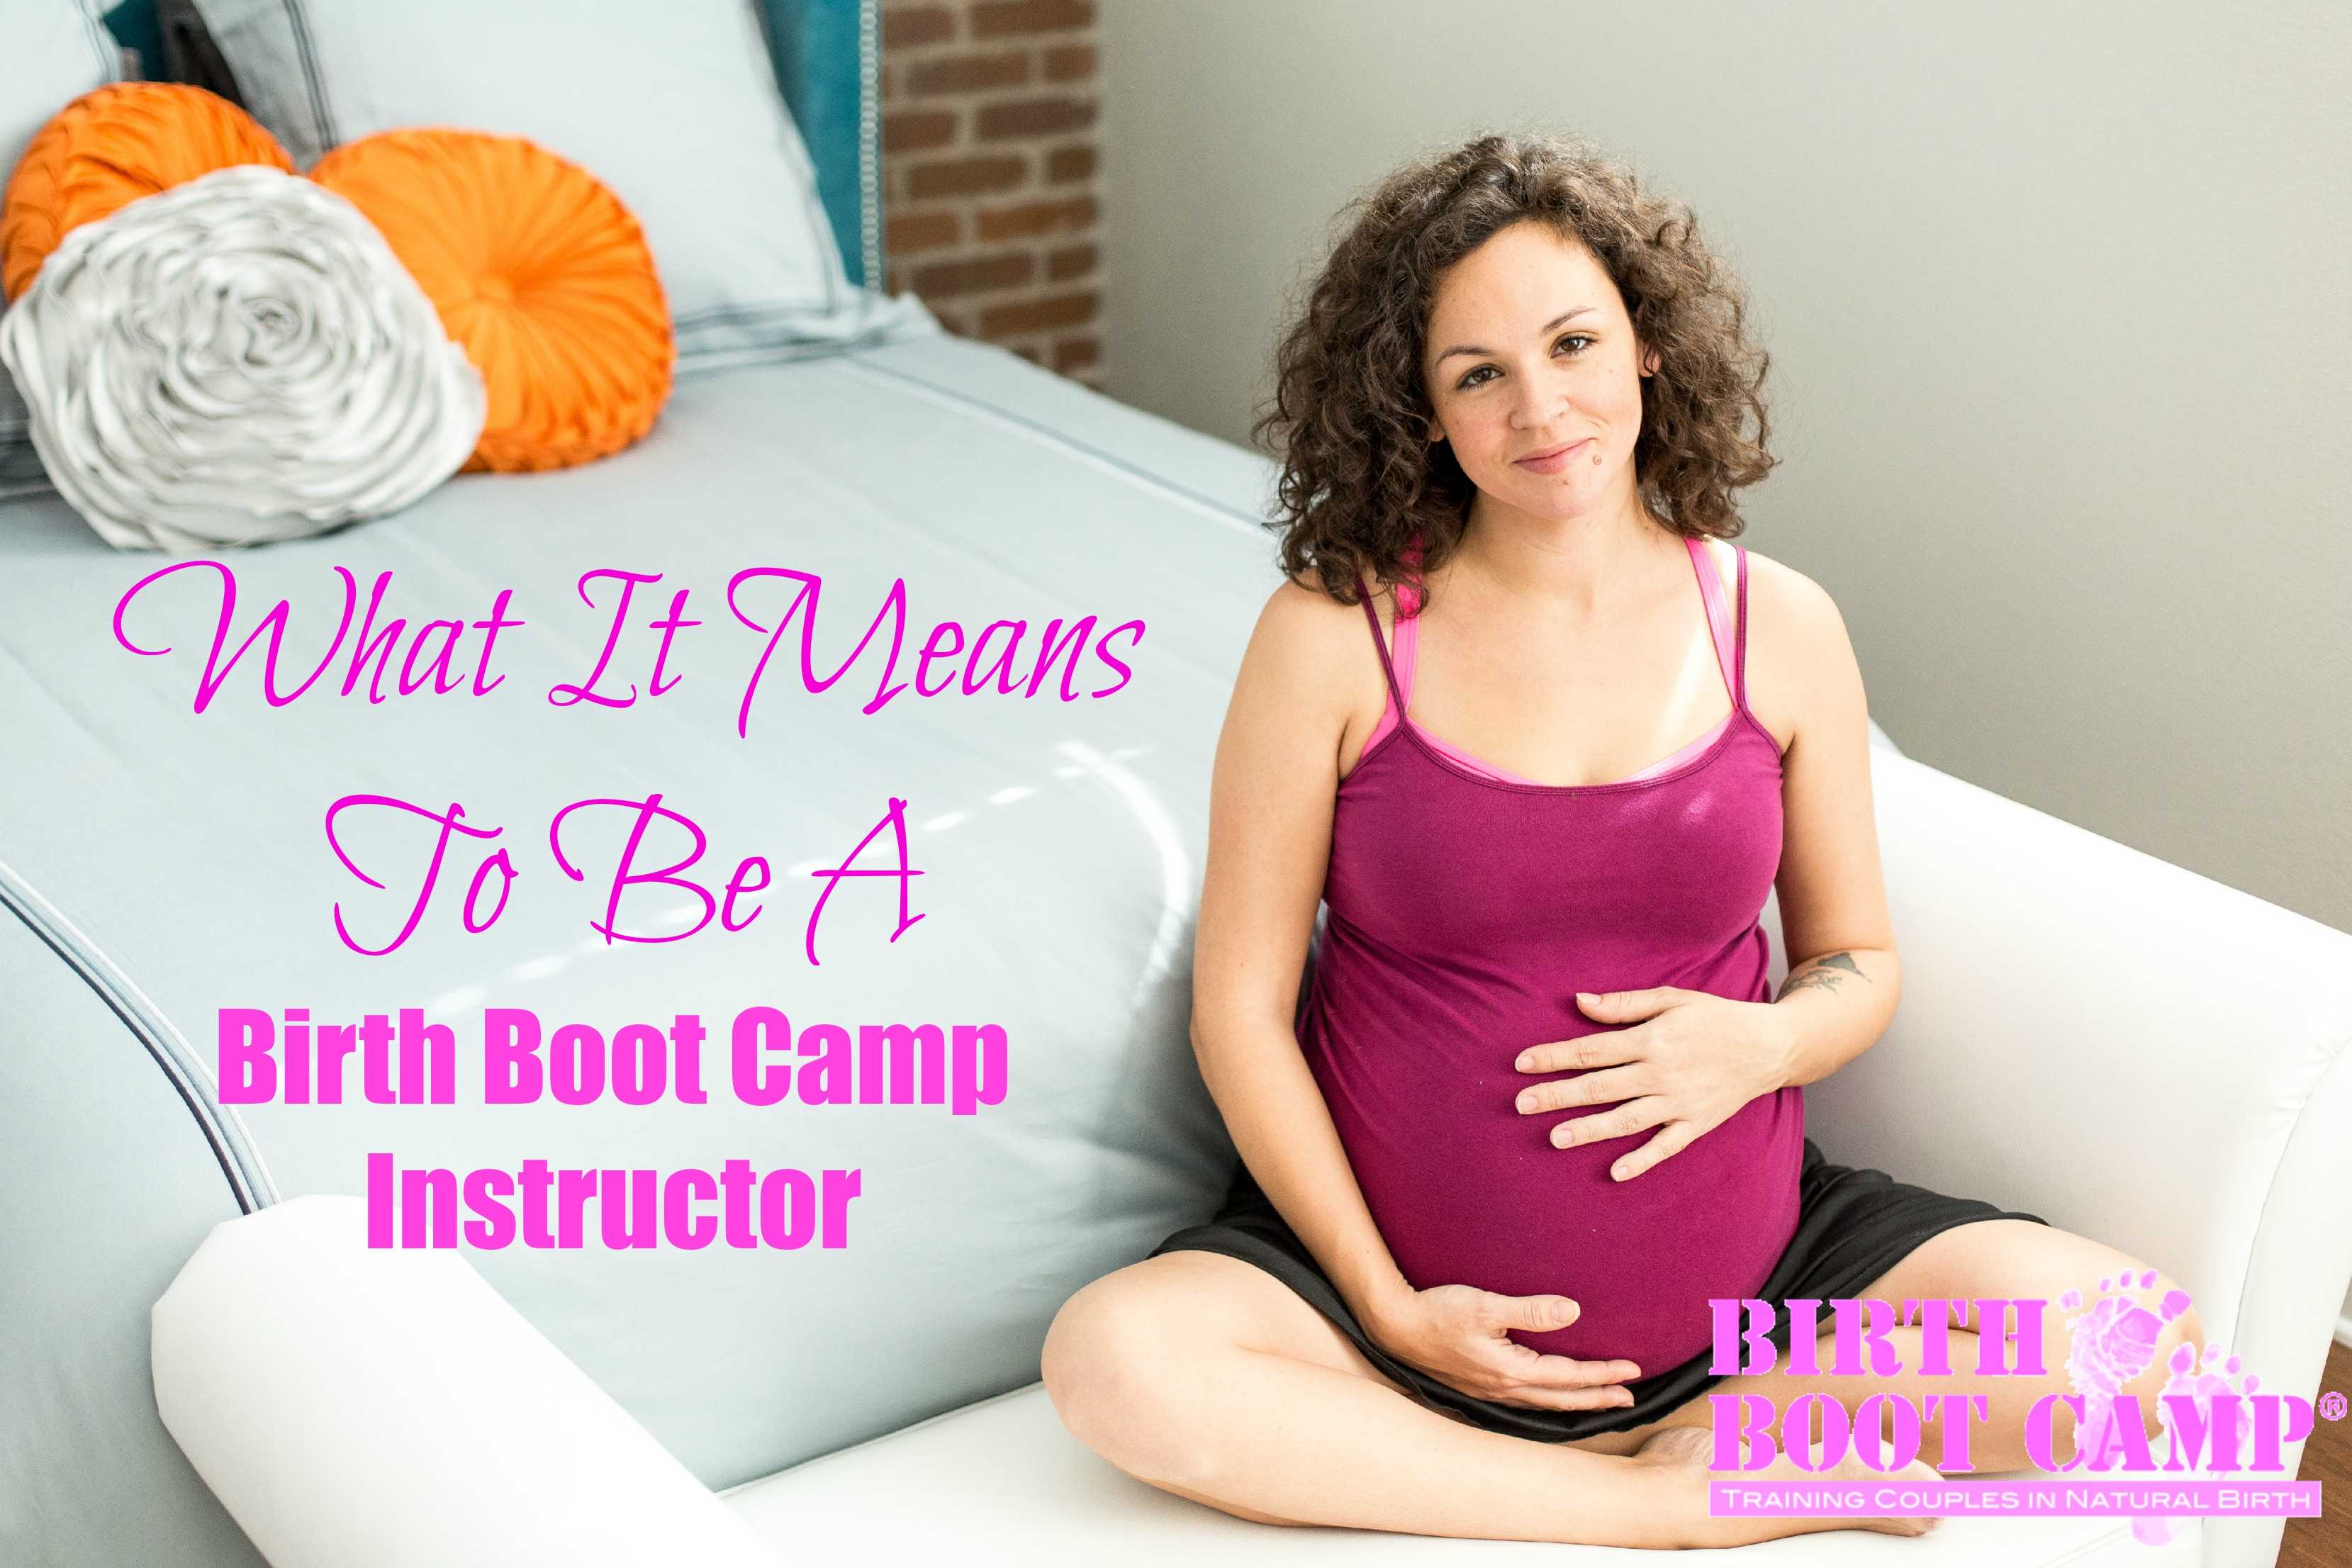 What is involved in being a Birth Boot Camp instructor.